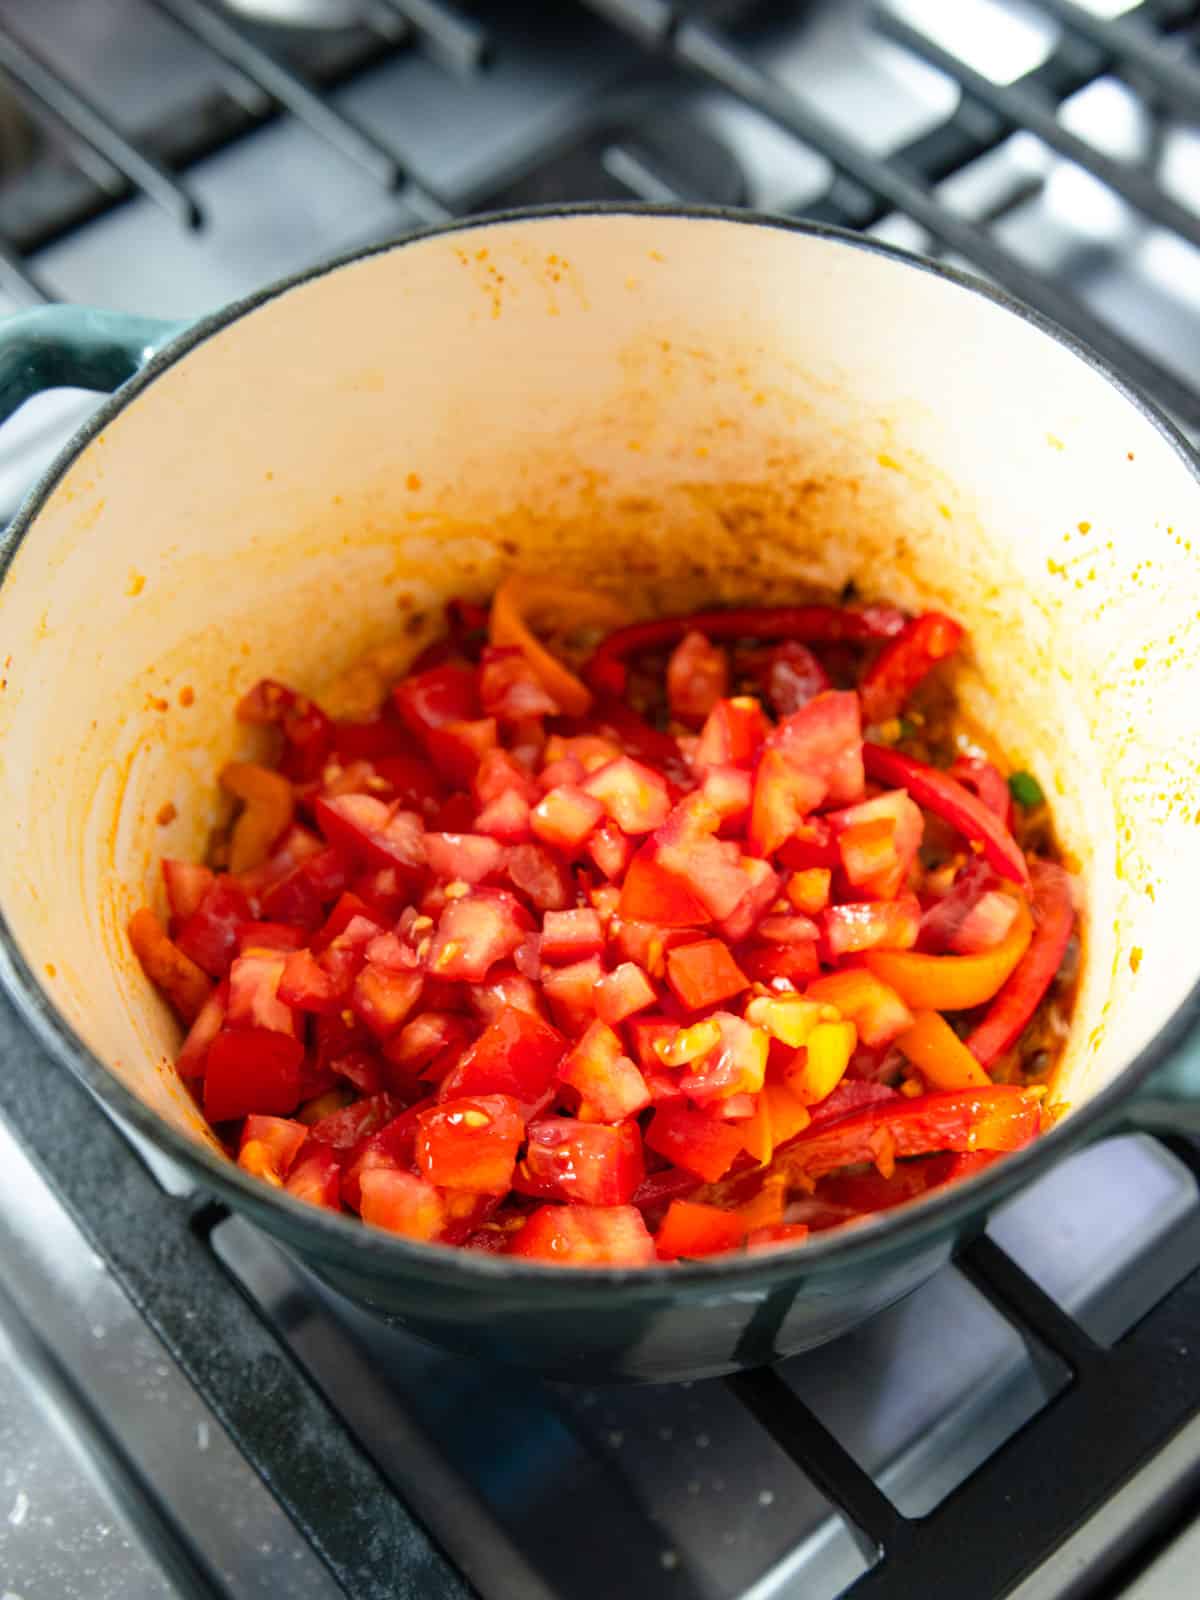 Add the chopped tomatoes to the pot, with their juices.